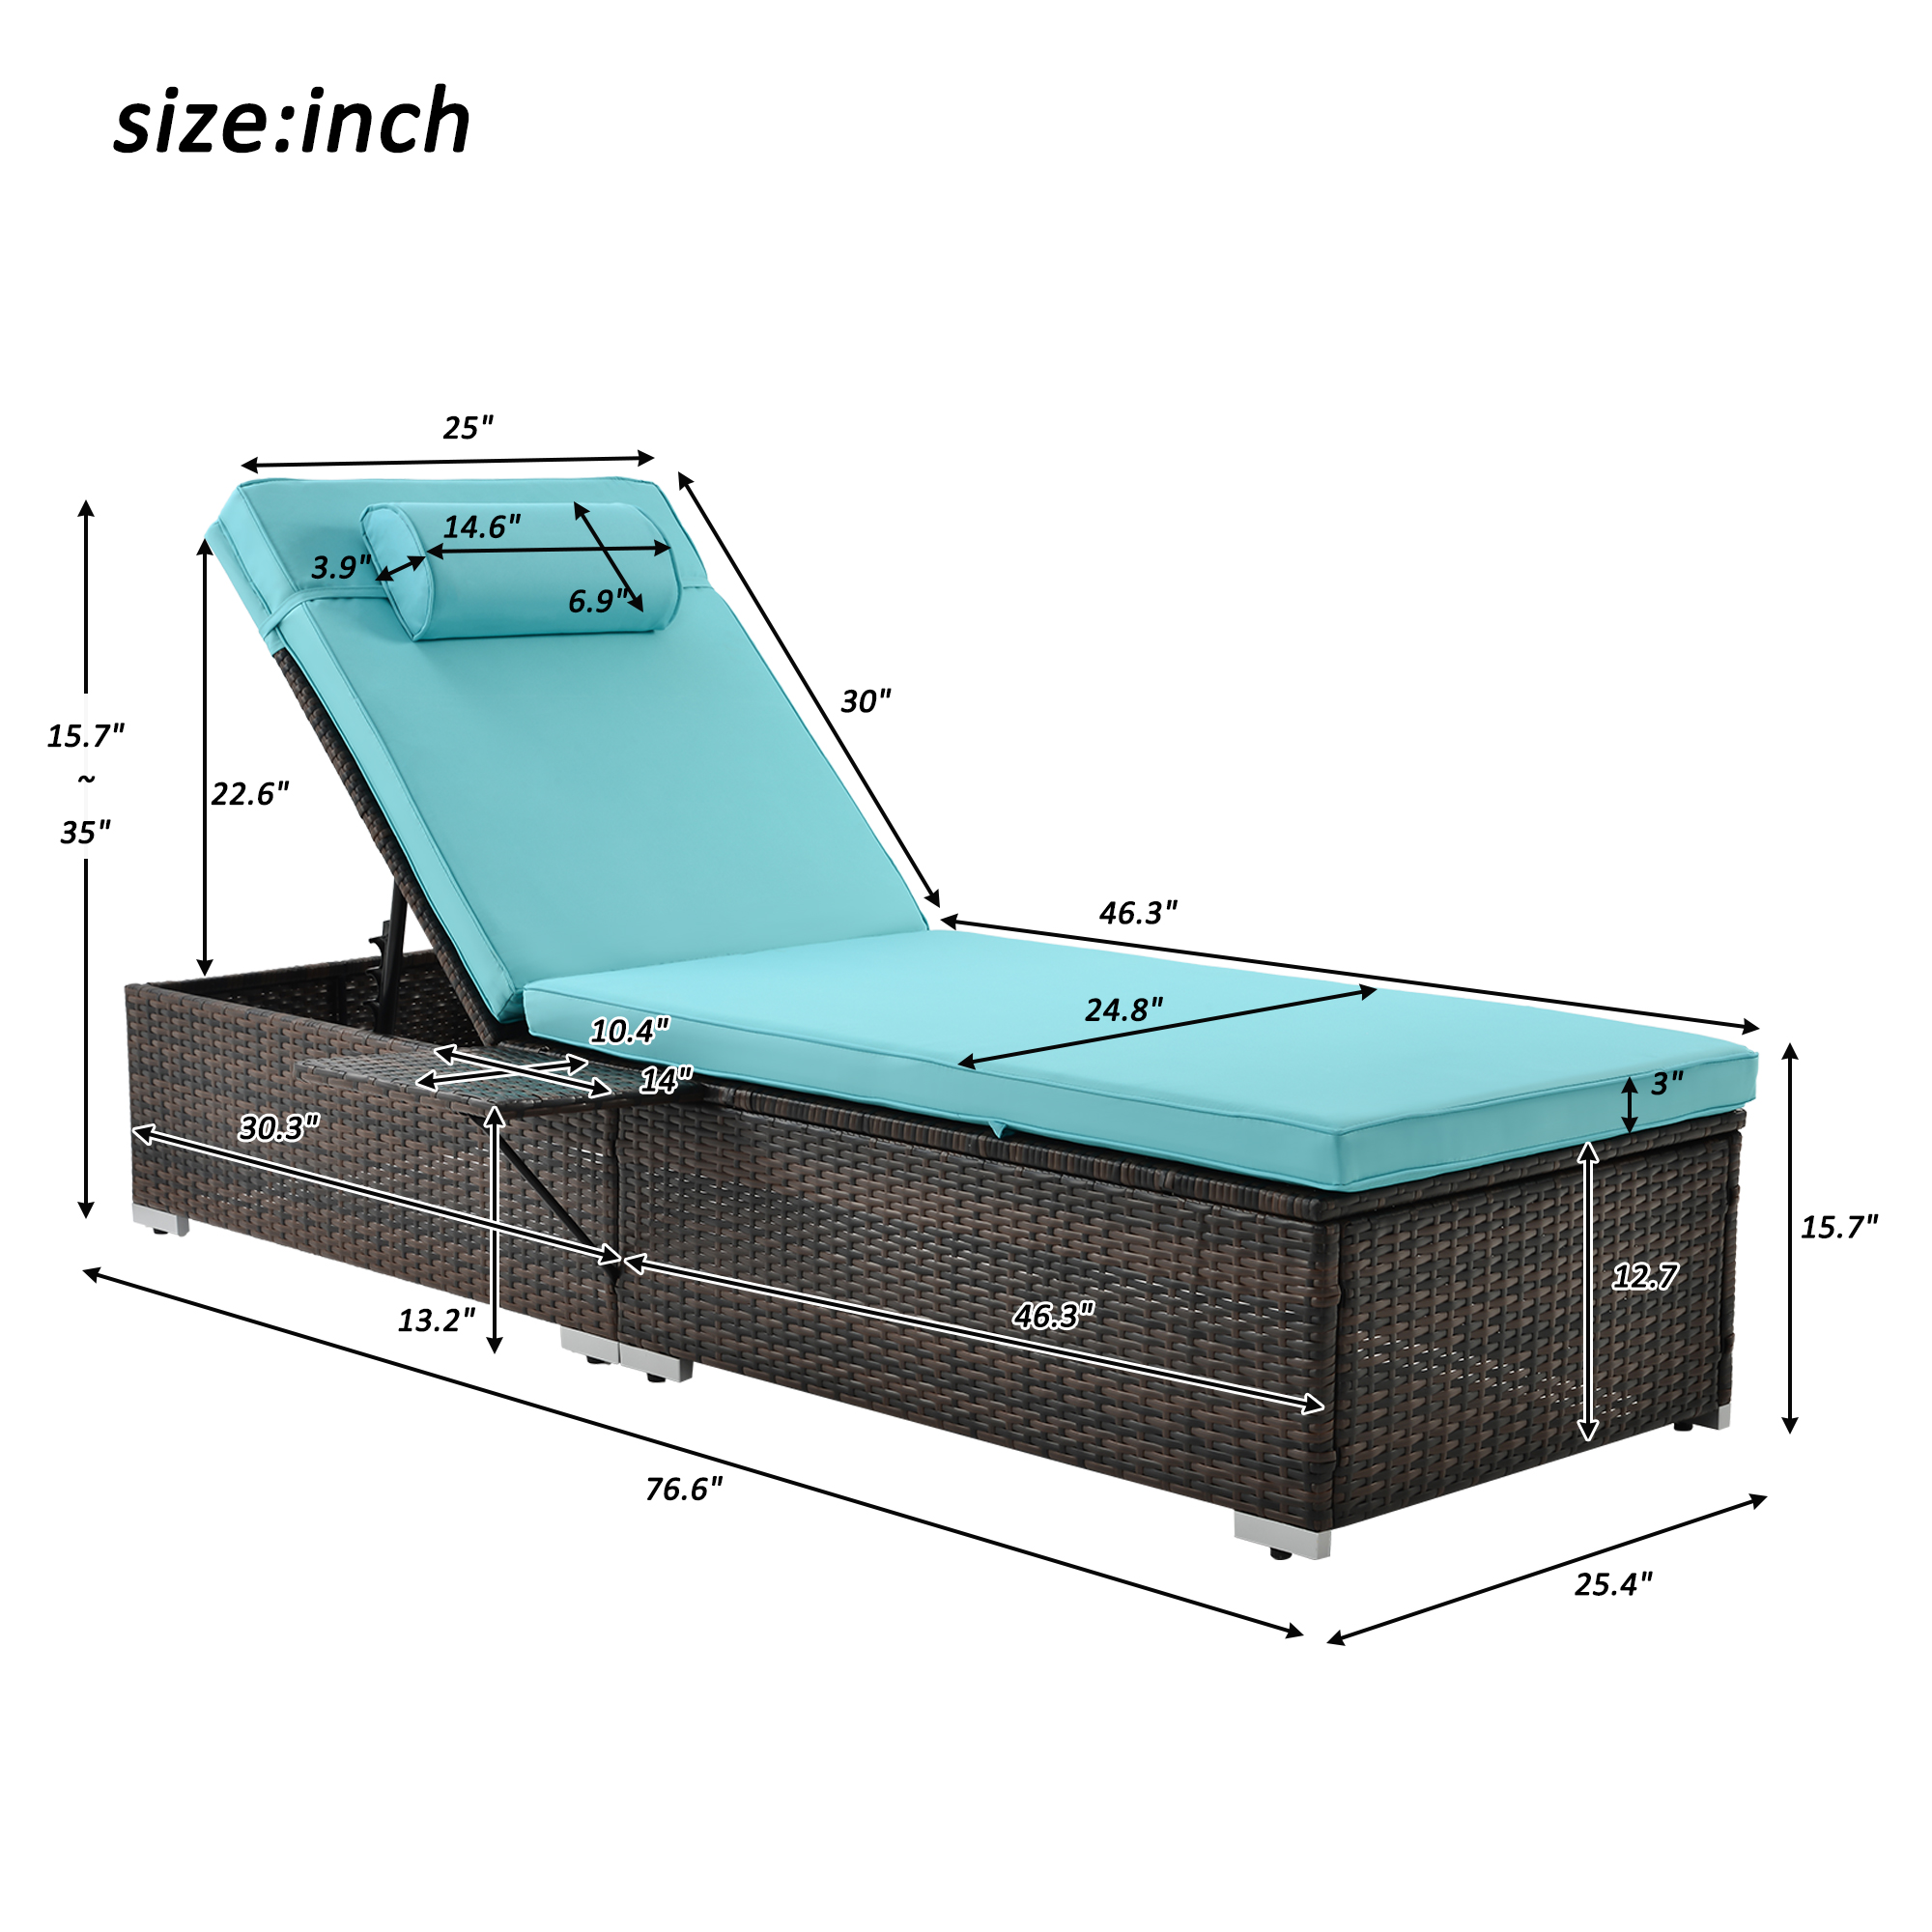 2 Pieces Outdoor Patio PE Wicker Chaise Lounge Set, Adjustable Reclining Lounge Chairs with Side Table and Head Pillow, Outdoor Chaise Lounger with Cushions for Patio Pool Backyard Porch Garden, B67 - image 4 of 11